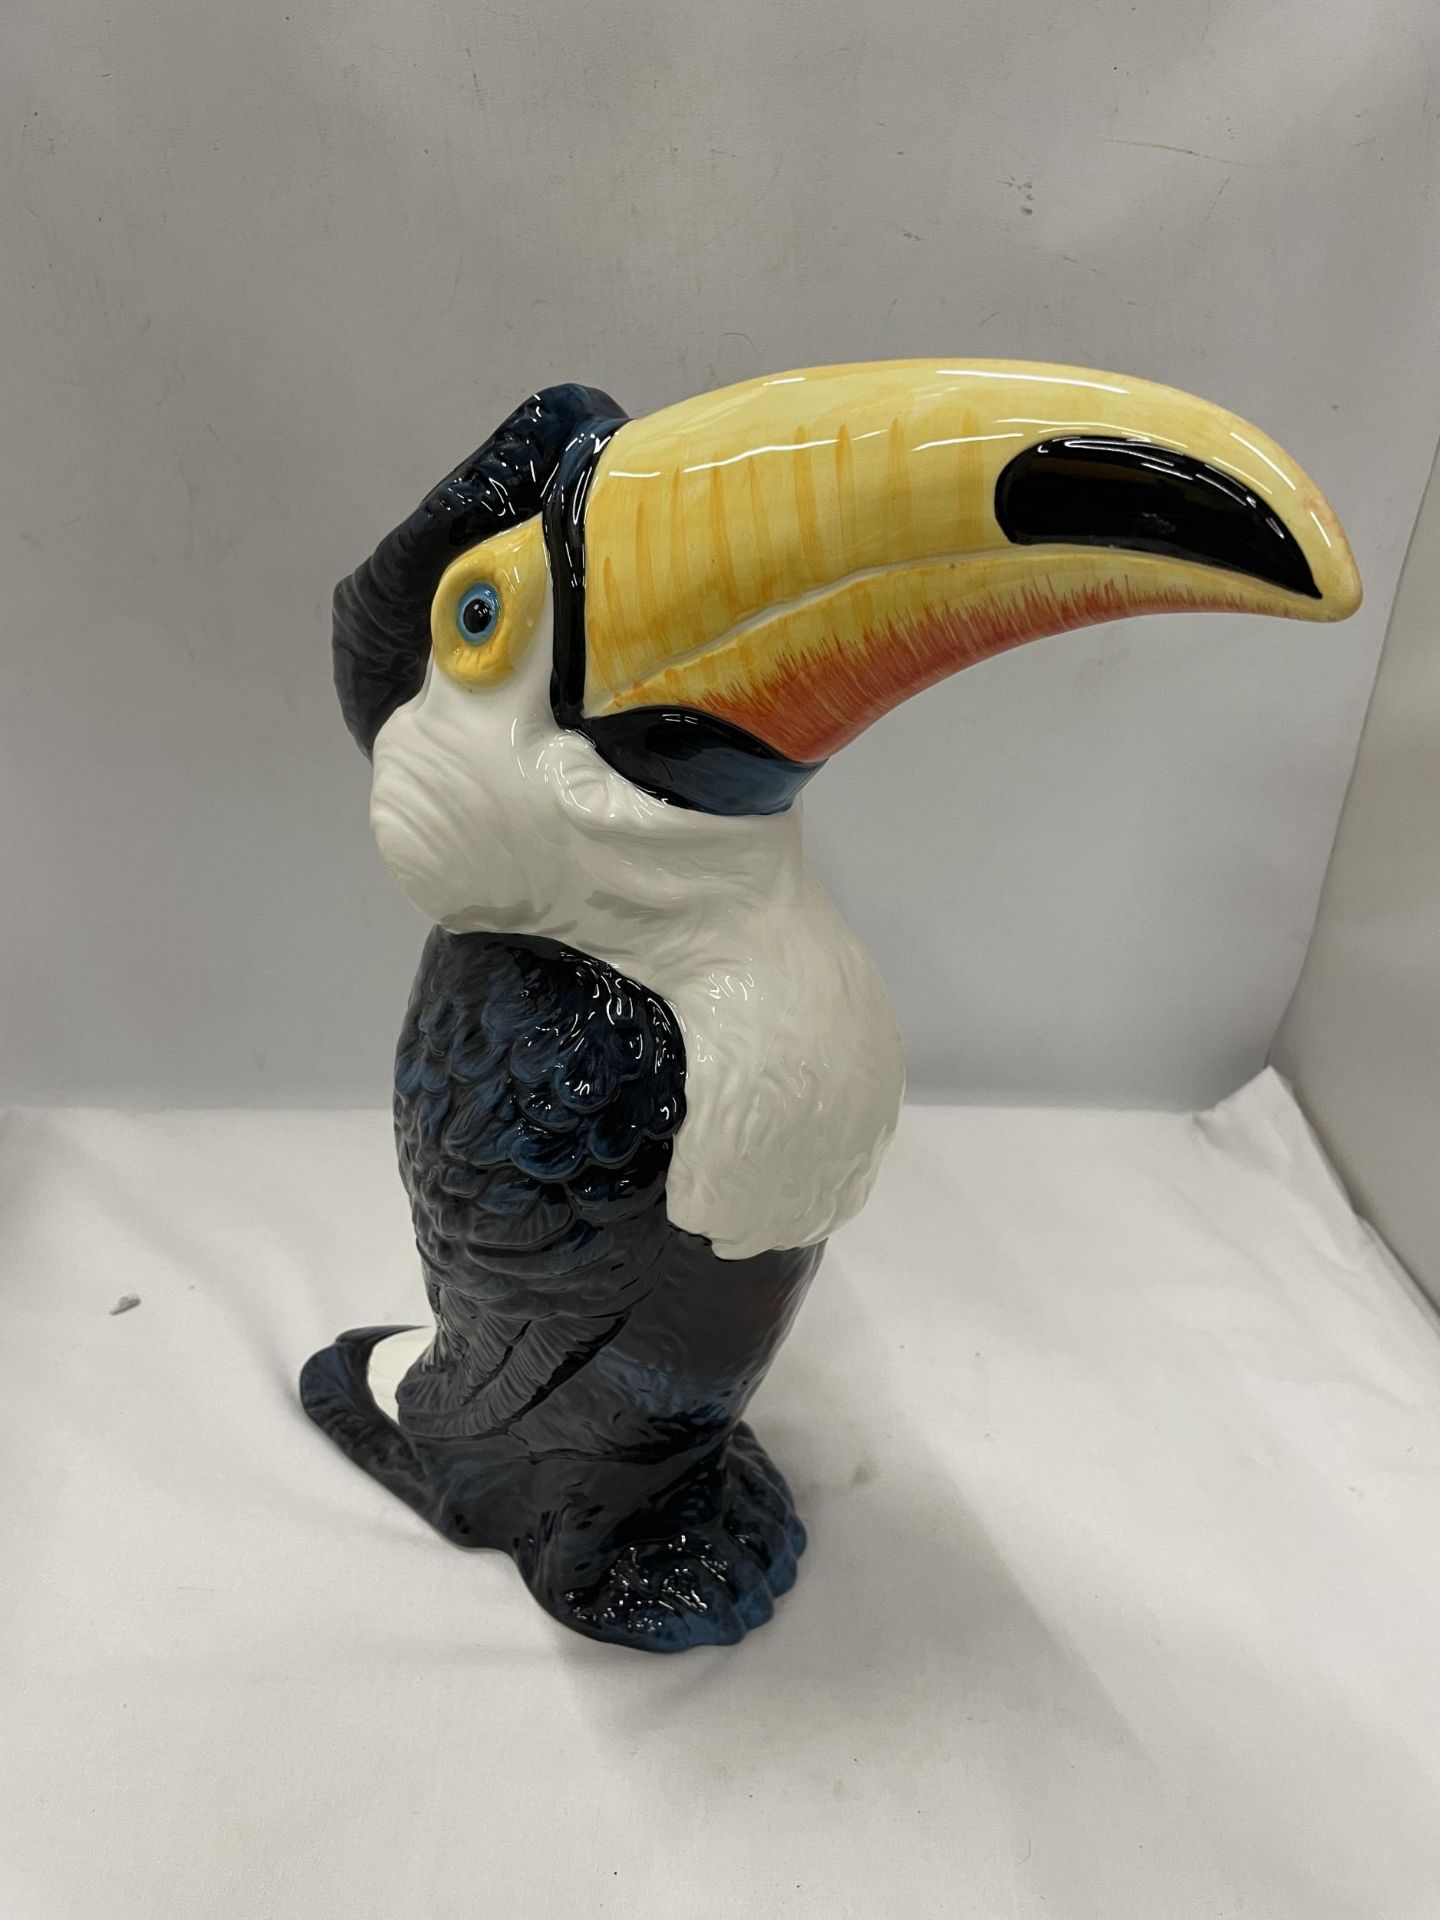 A DRAGONFLY JACK GRAHAM DESIGN TOUCAN FIGURE - Image 2 of 4